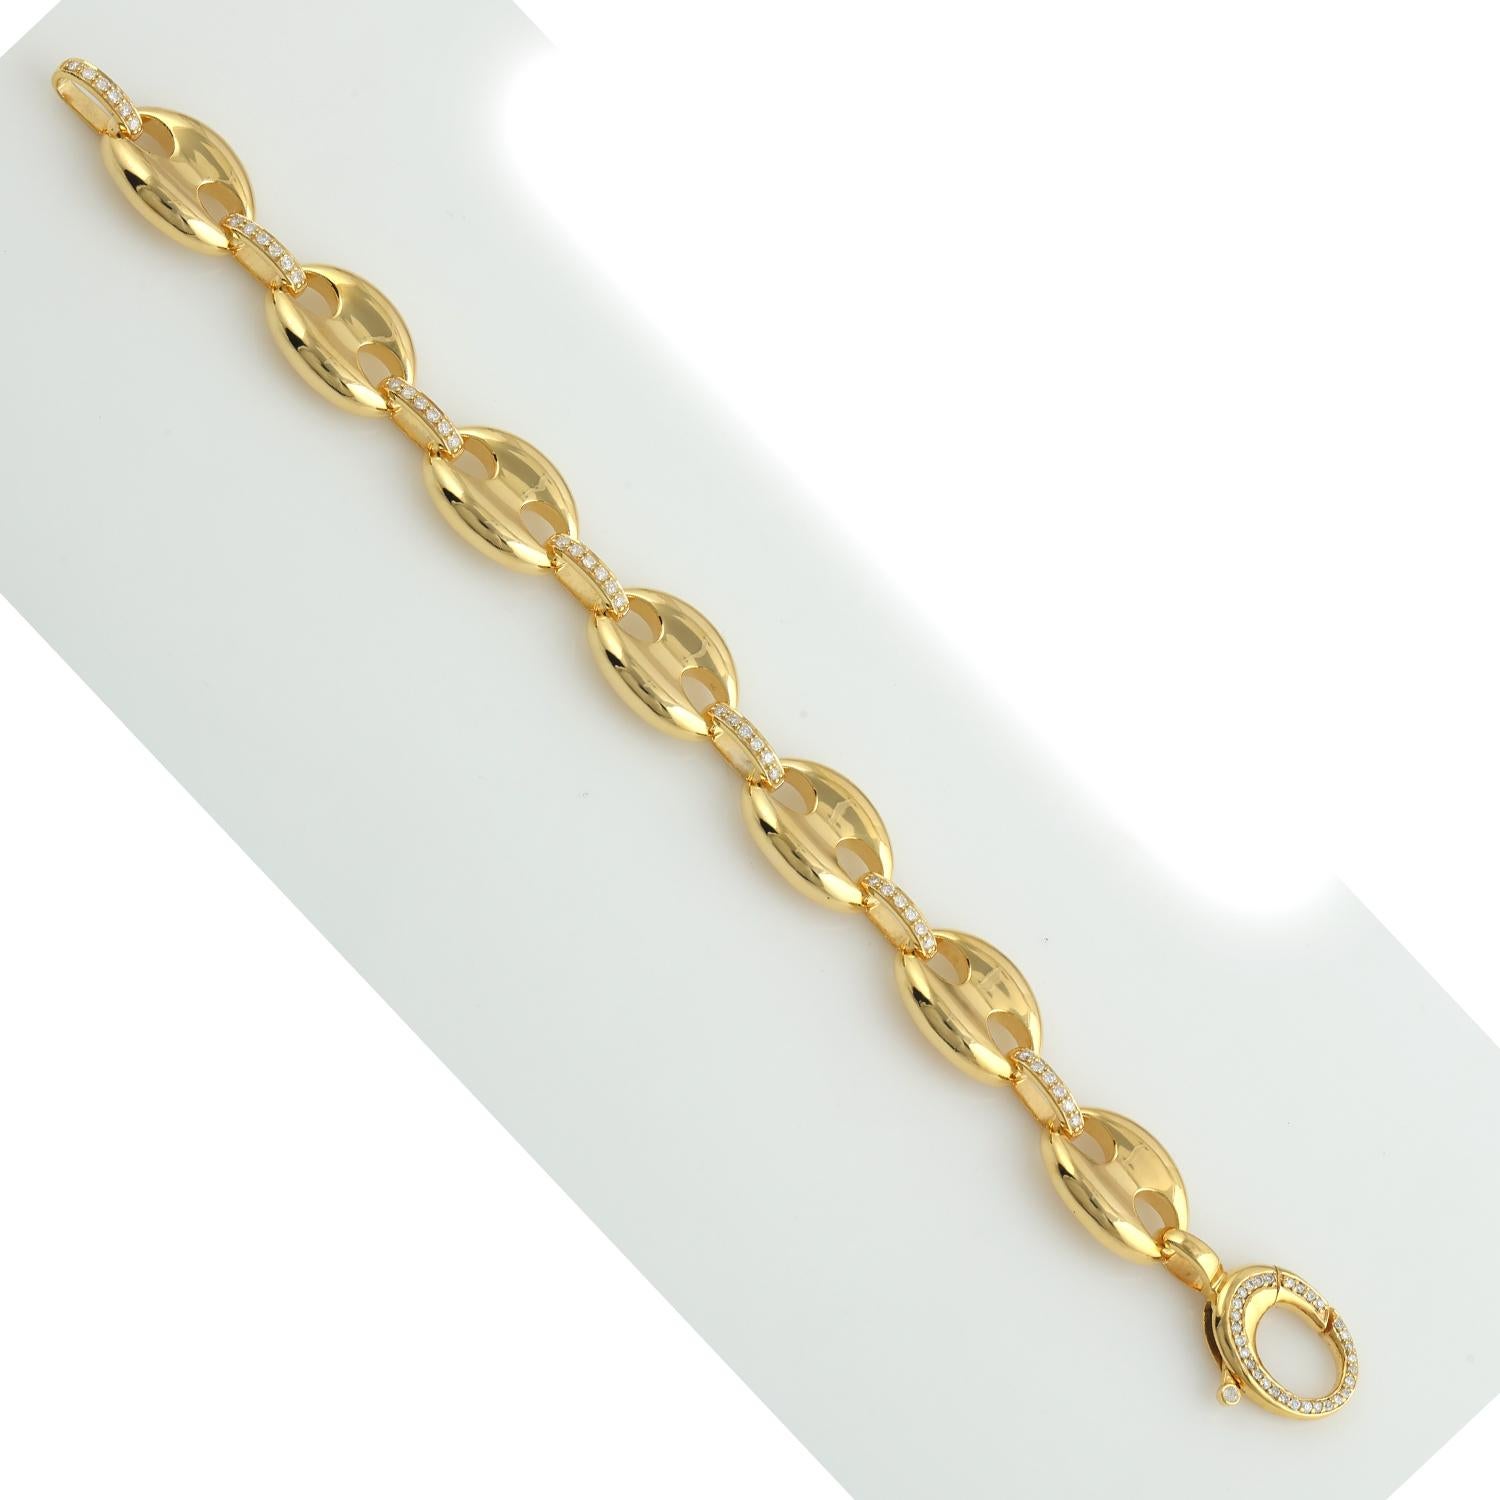 Contemporary Pave Diamond Link Bracelet Made In 14K Yellow Gold For Sale